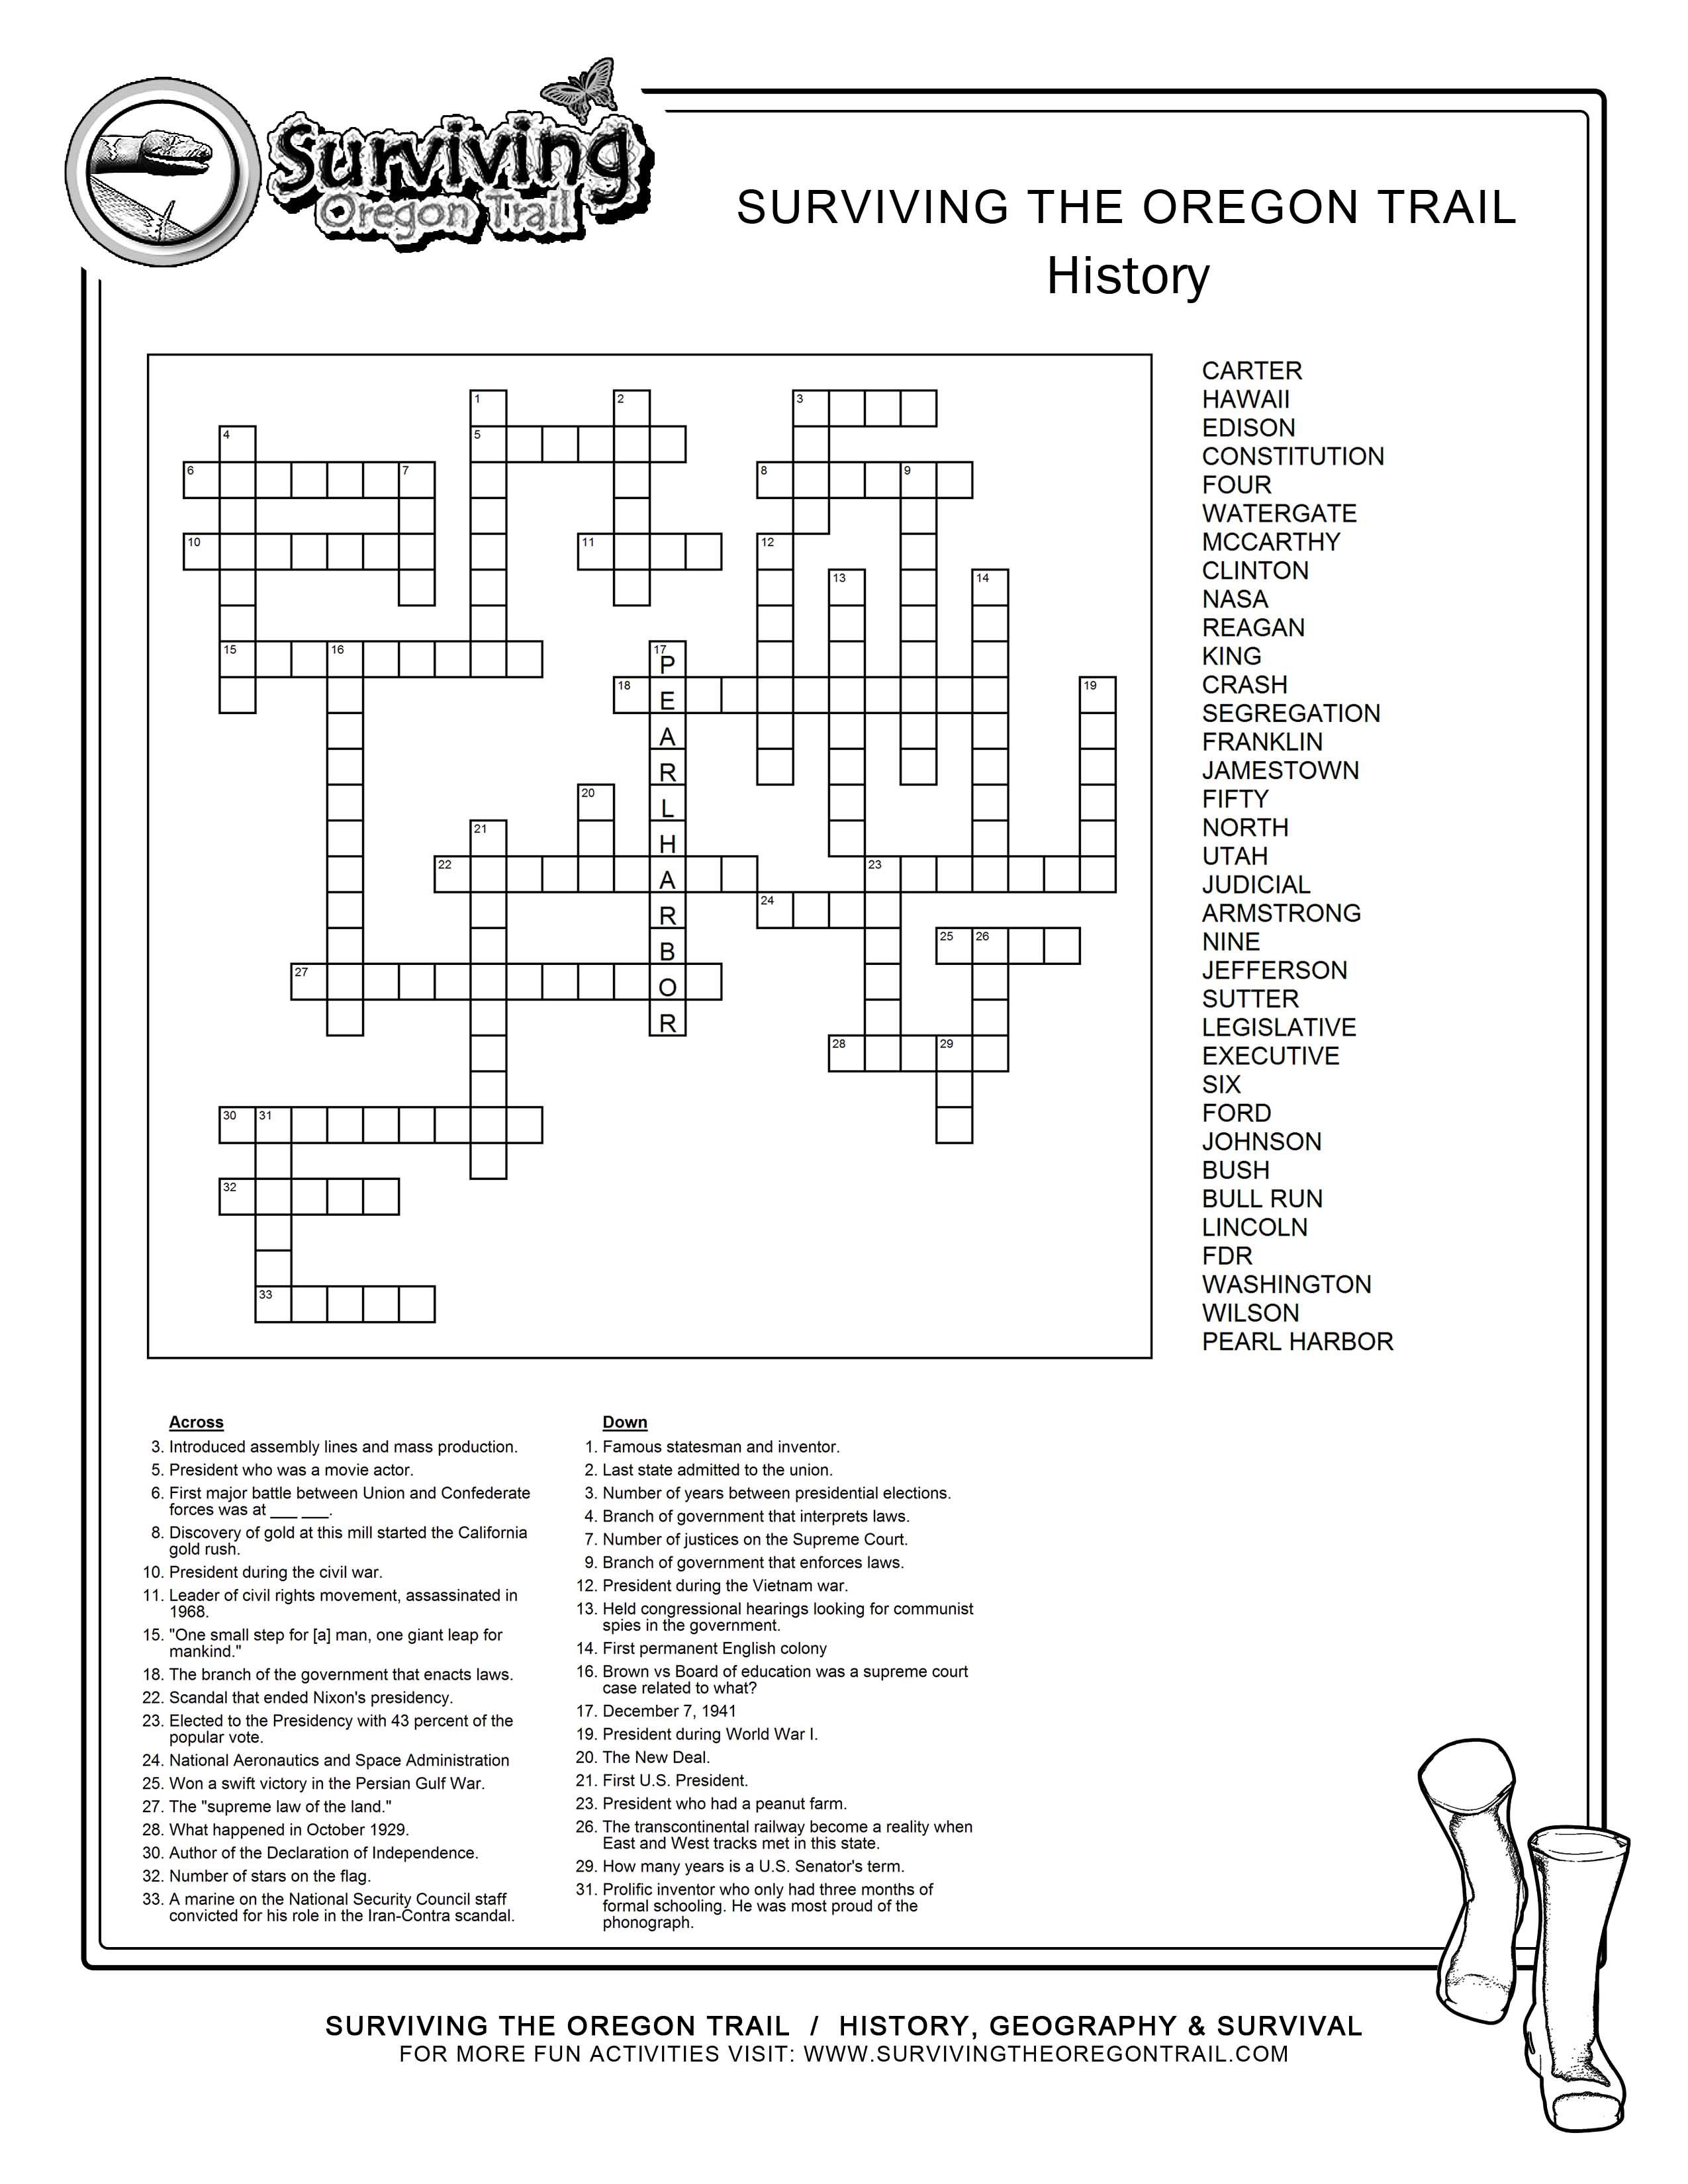 Fill Free To Save This Historical Crossword Puzzle To Your Computer - Computer Crossword Puzzles Printable